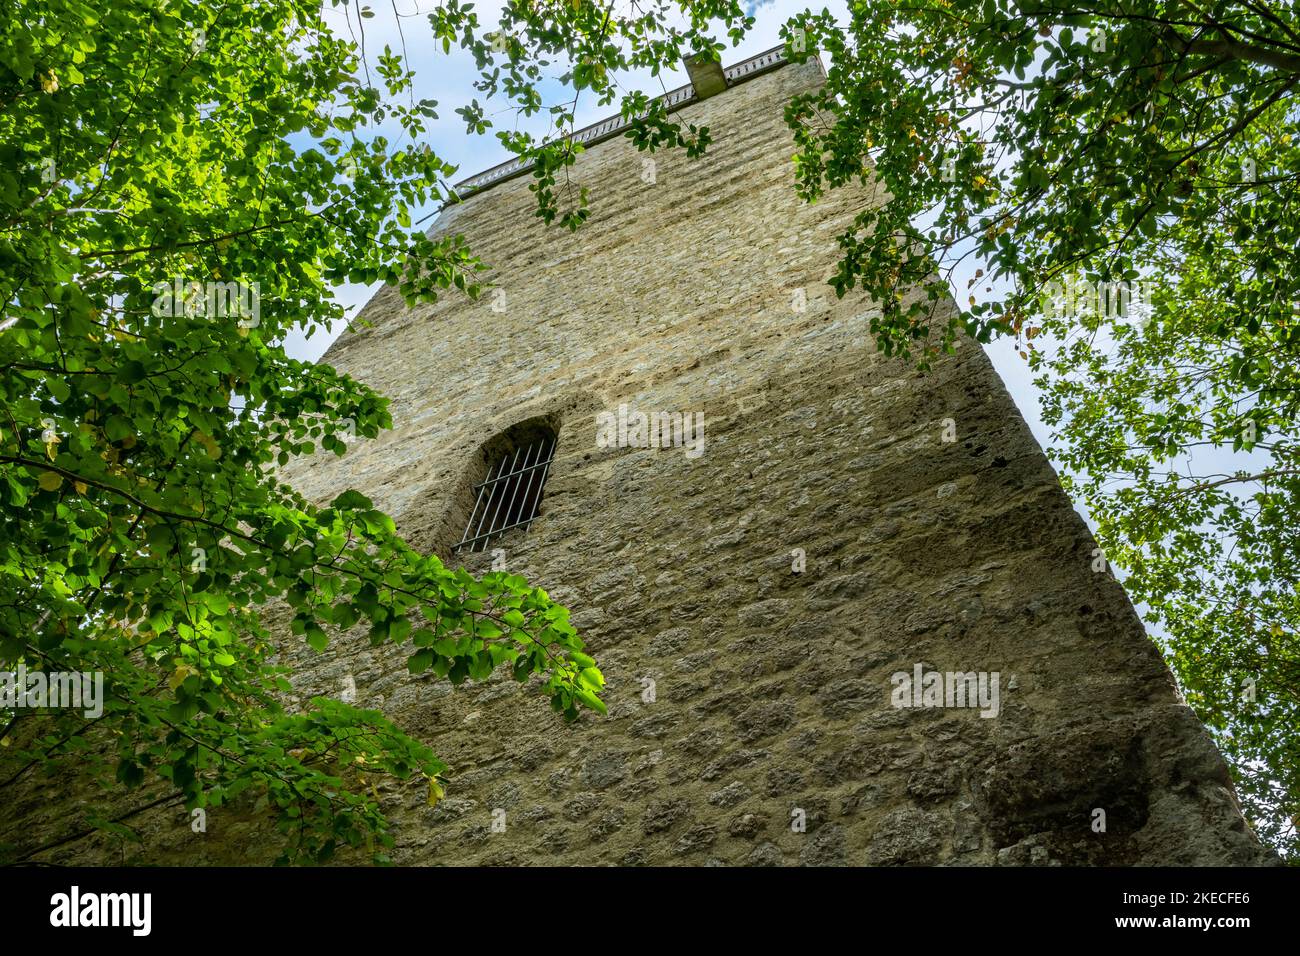 The Reichenstein ruins are located on a small spur on the right edge of the Lautertal valley. The castle was built between 1230 and 1250. Only the keep and the neck moat have been preserved from the complex. Stock Photo